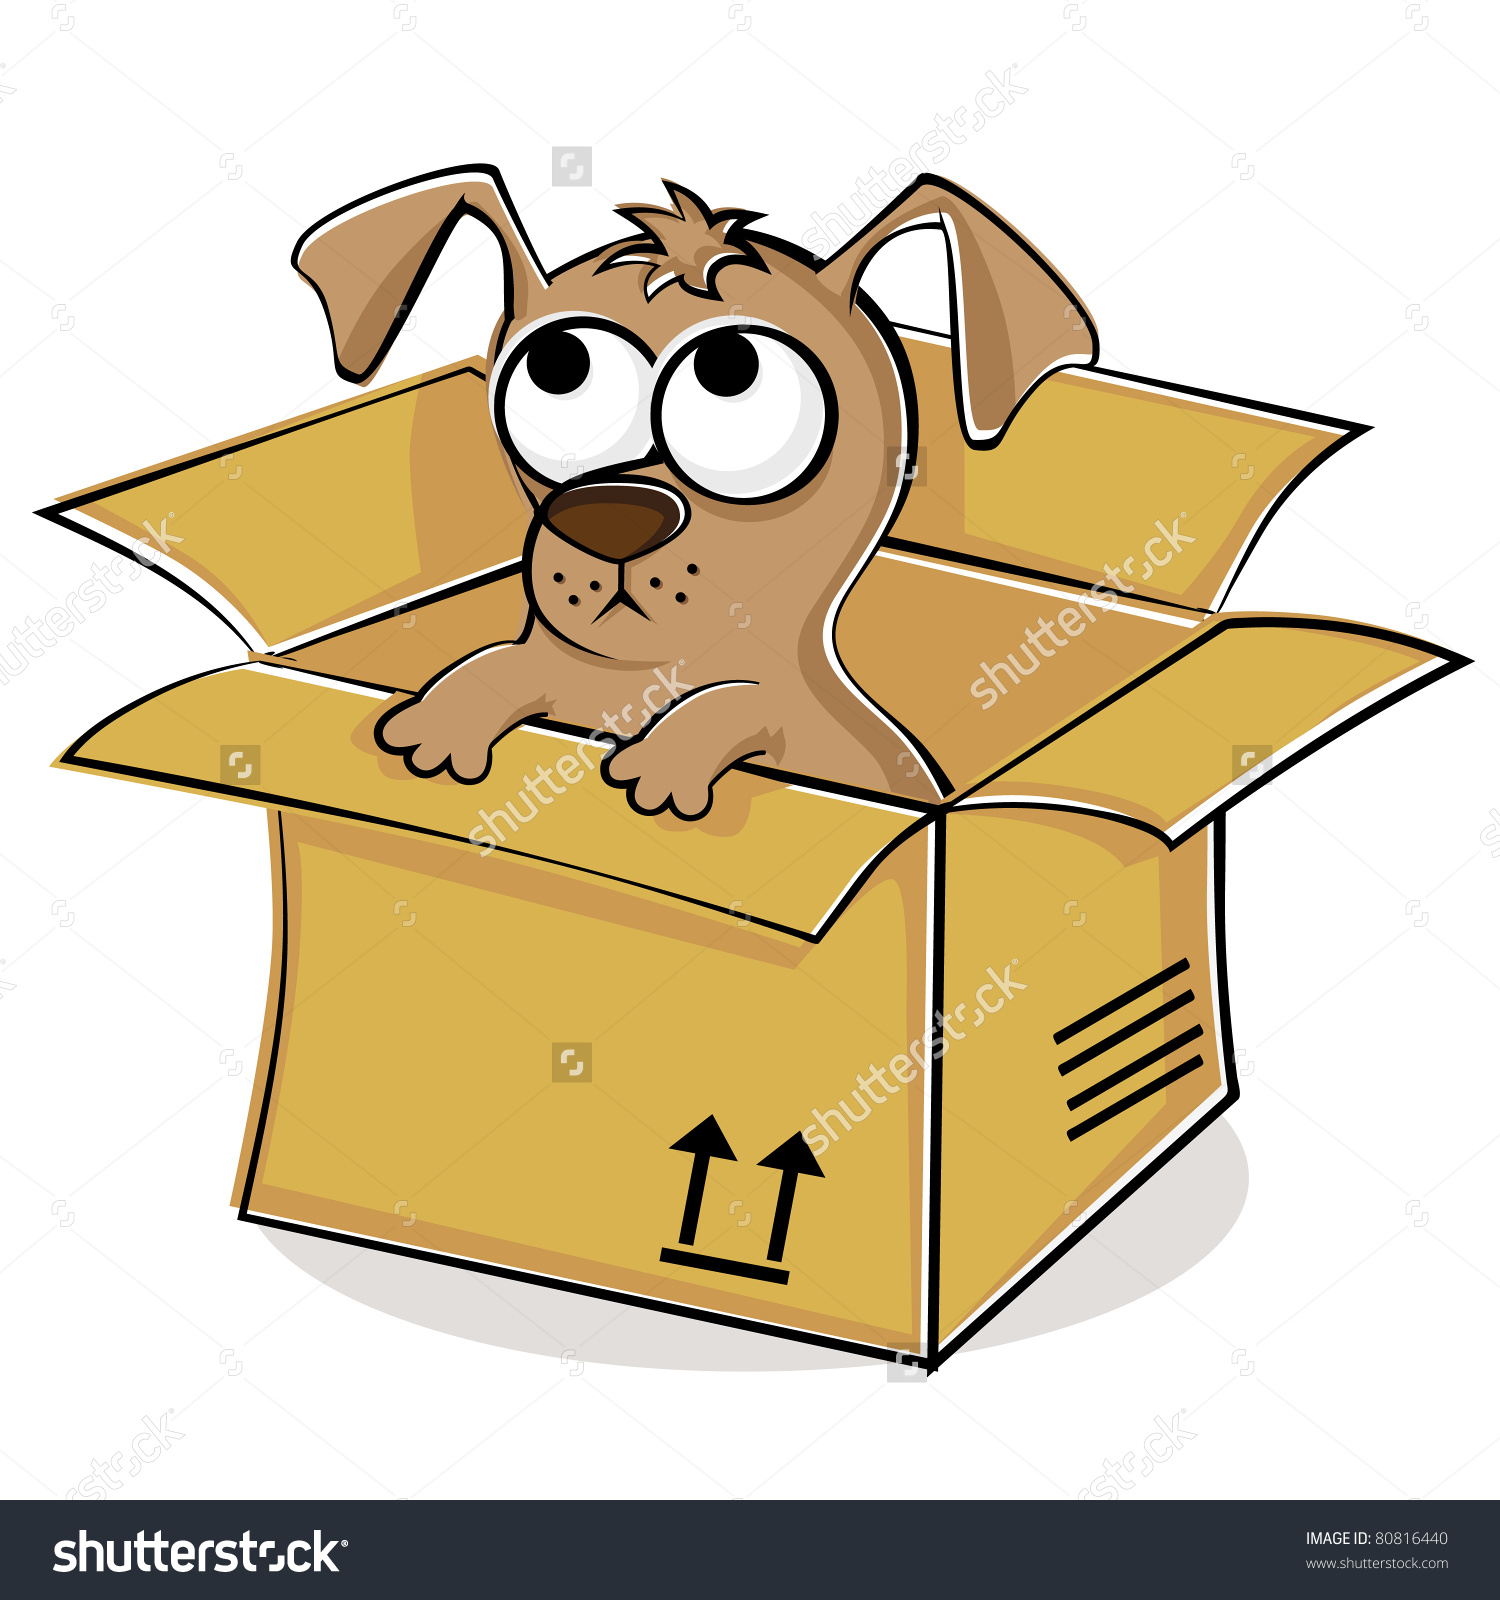 In a . Clipart dog box